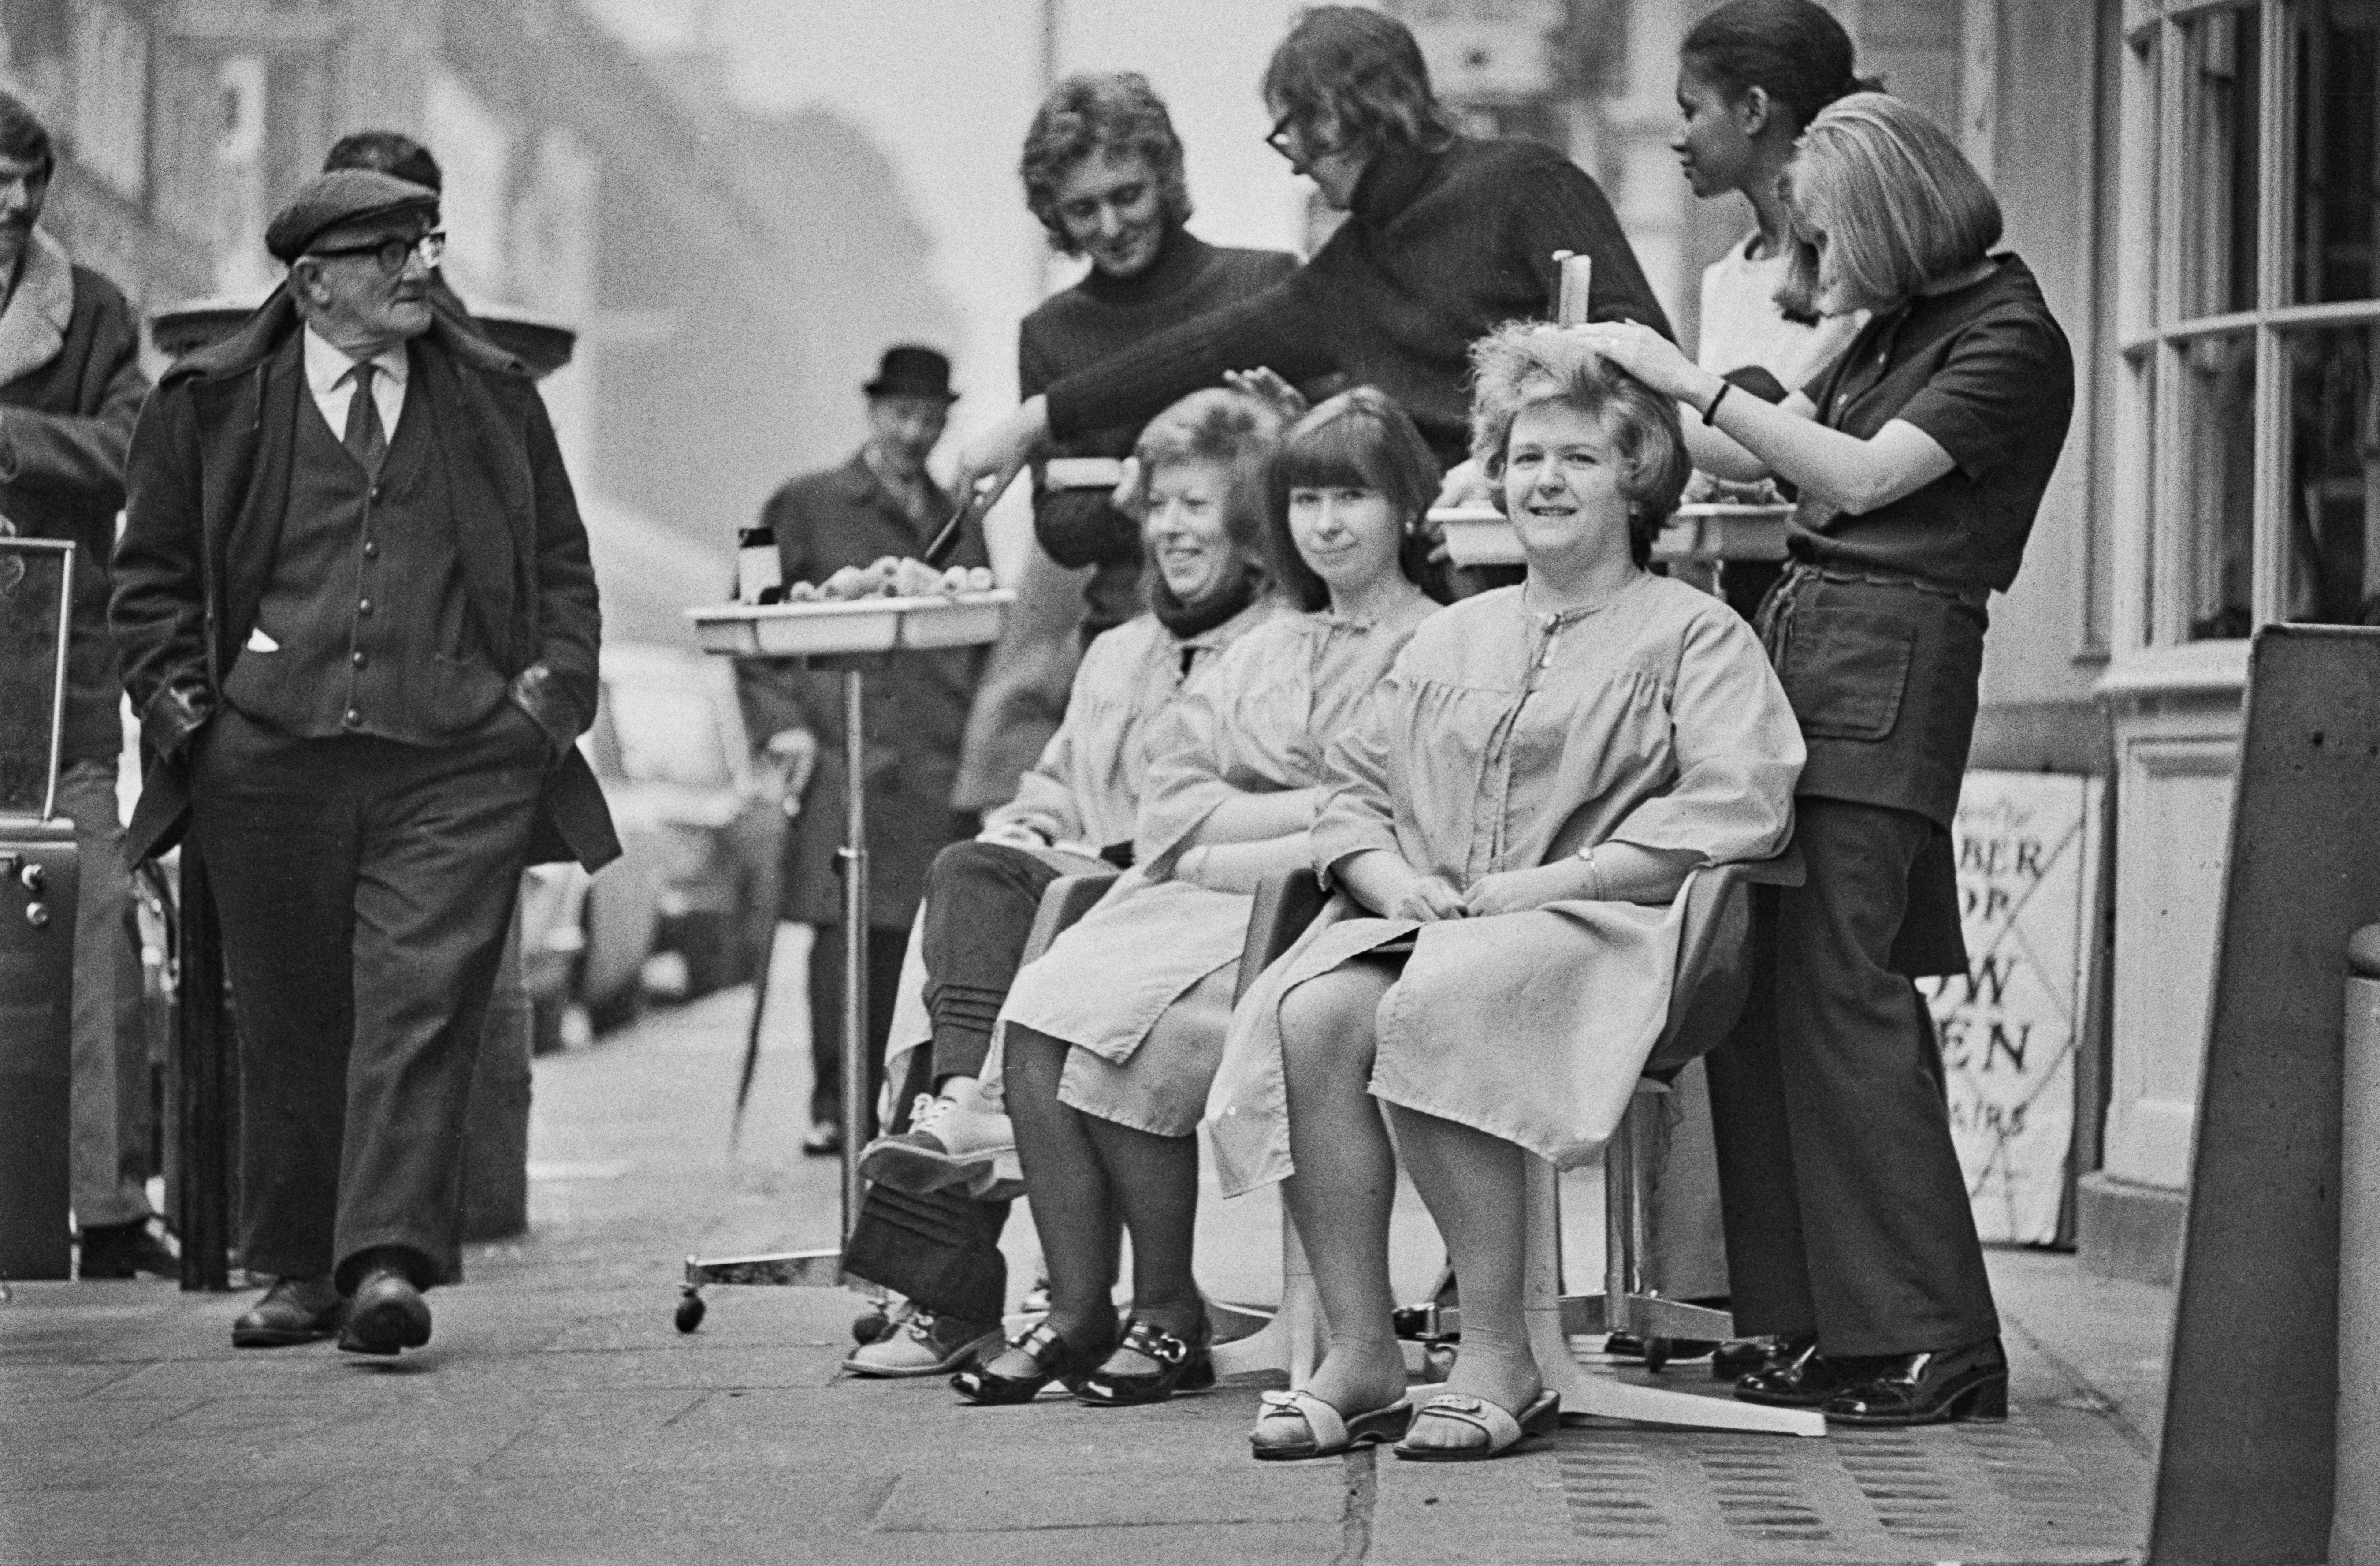 Customers having their hair cut on the pavement in Hatton Garden, London, due to power cuts in 1972